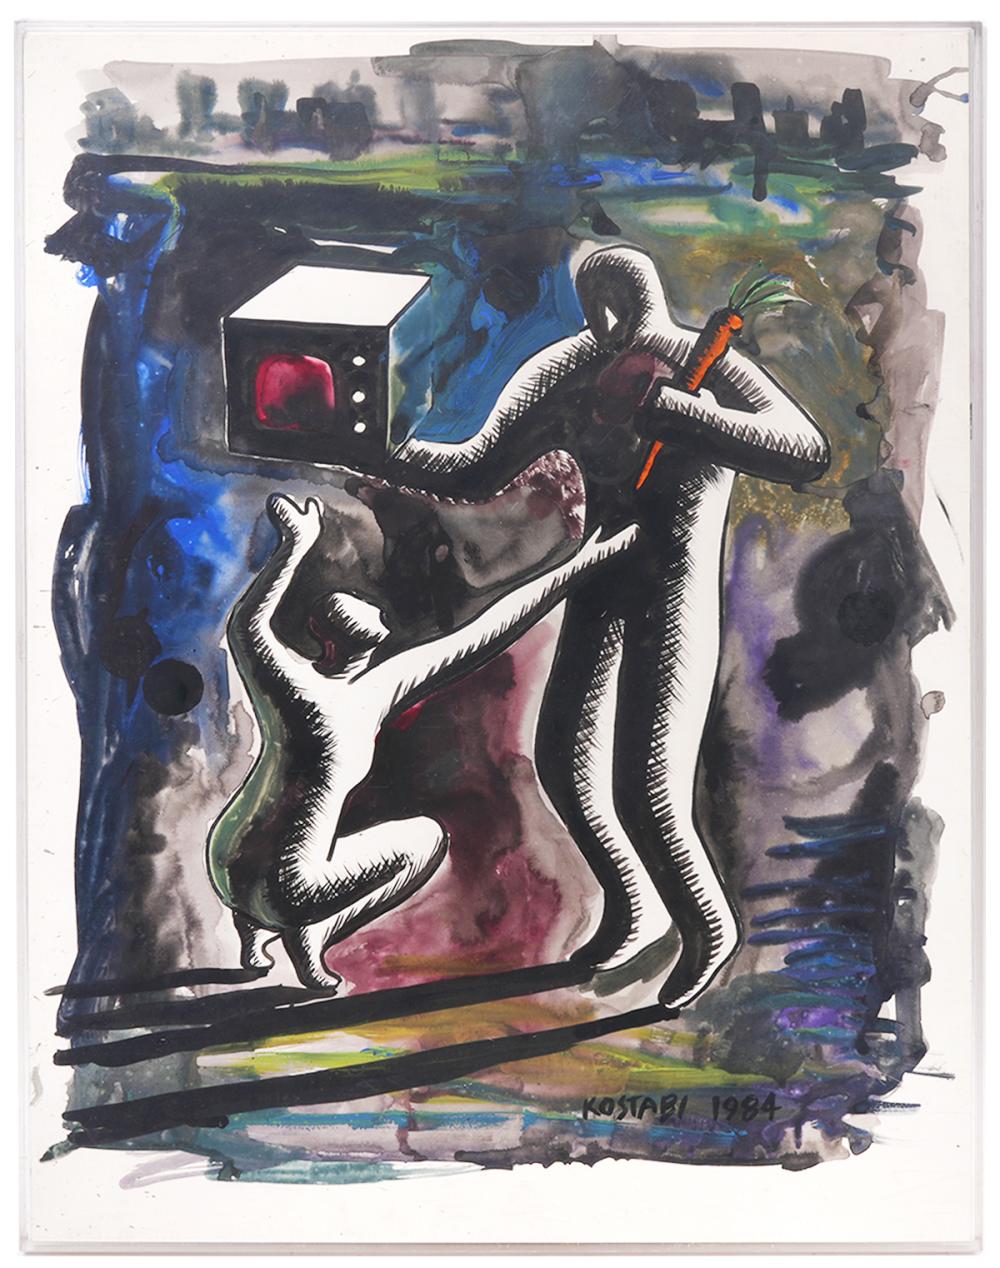 MARK KOSTABI UNTITLED WATERCOLOR 2ce74a